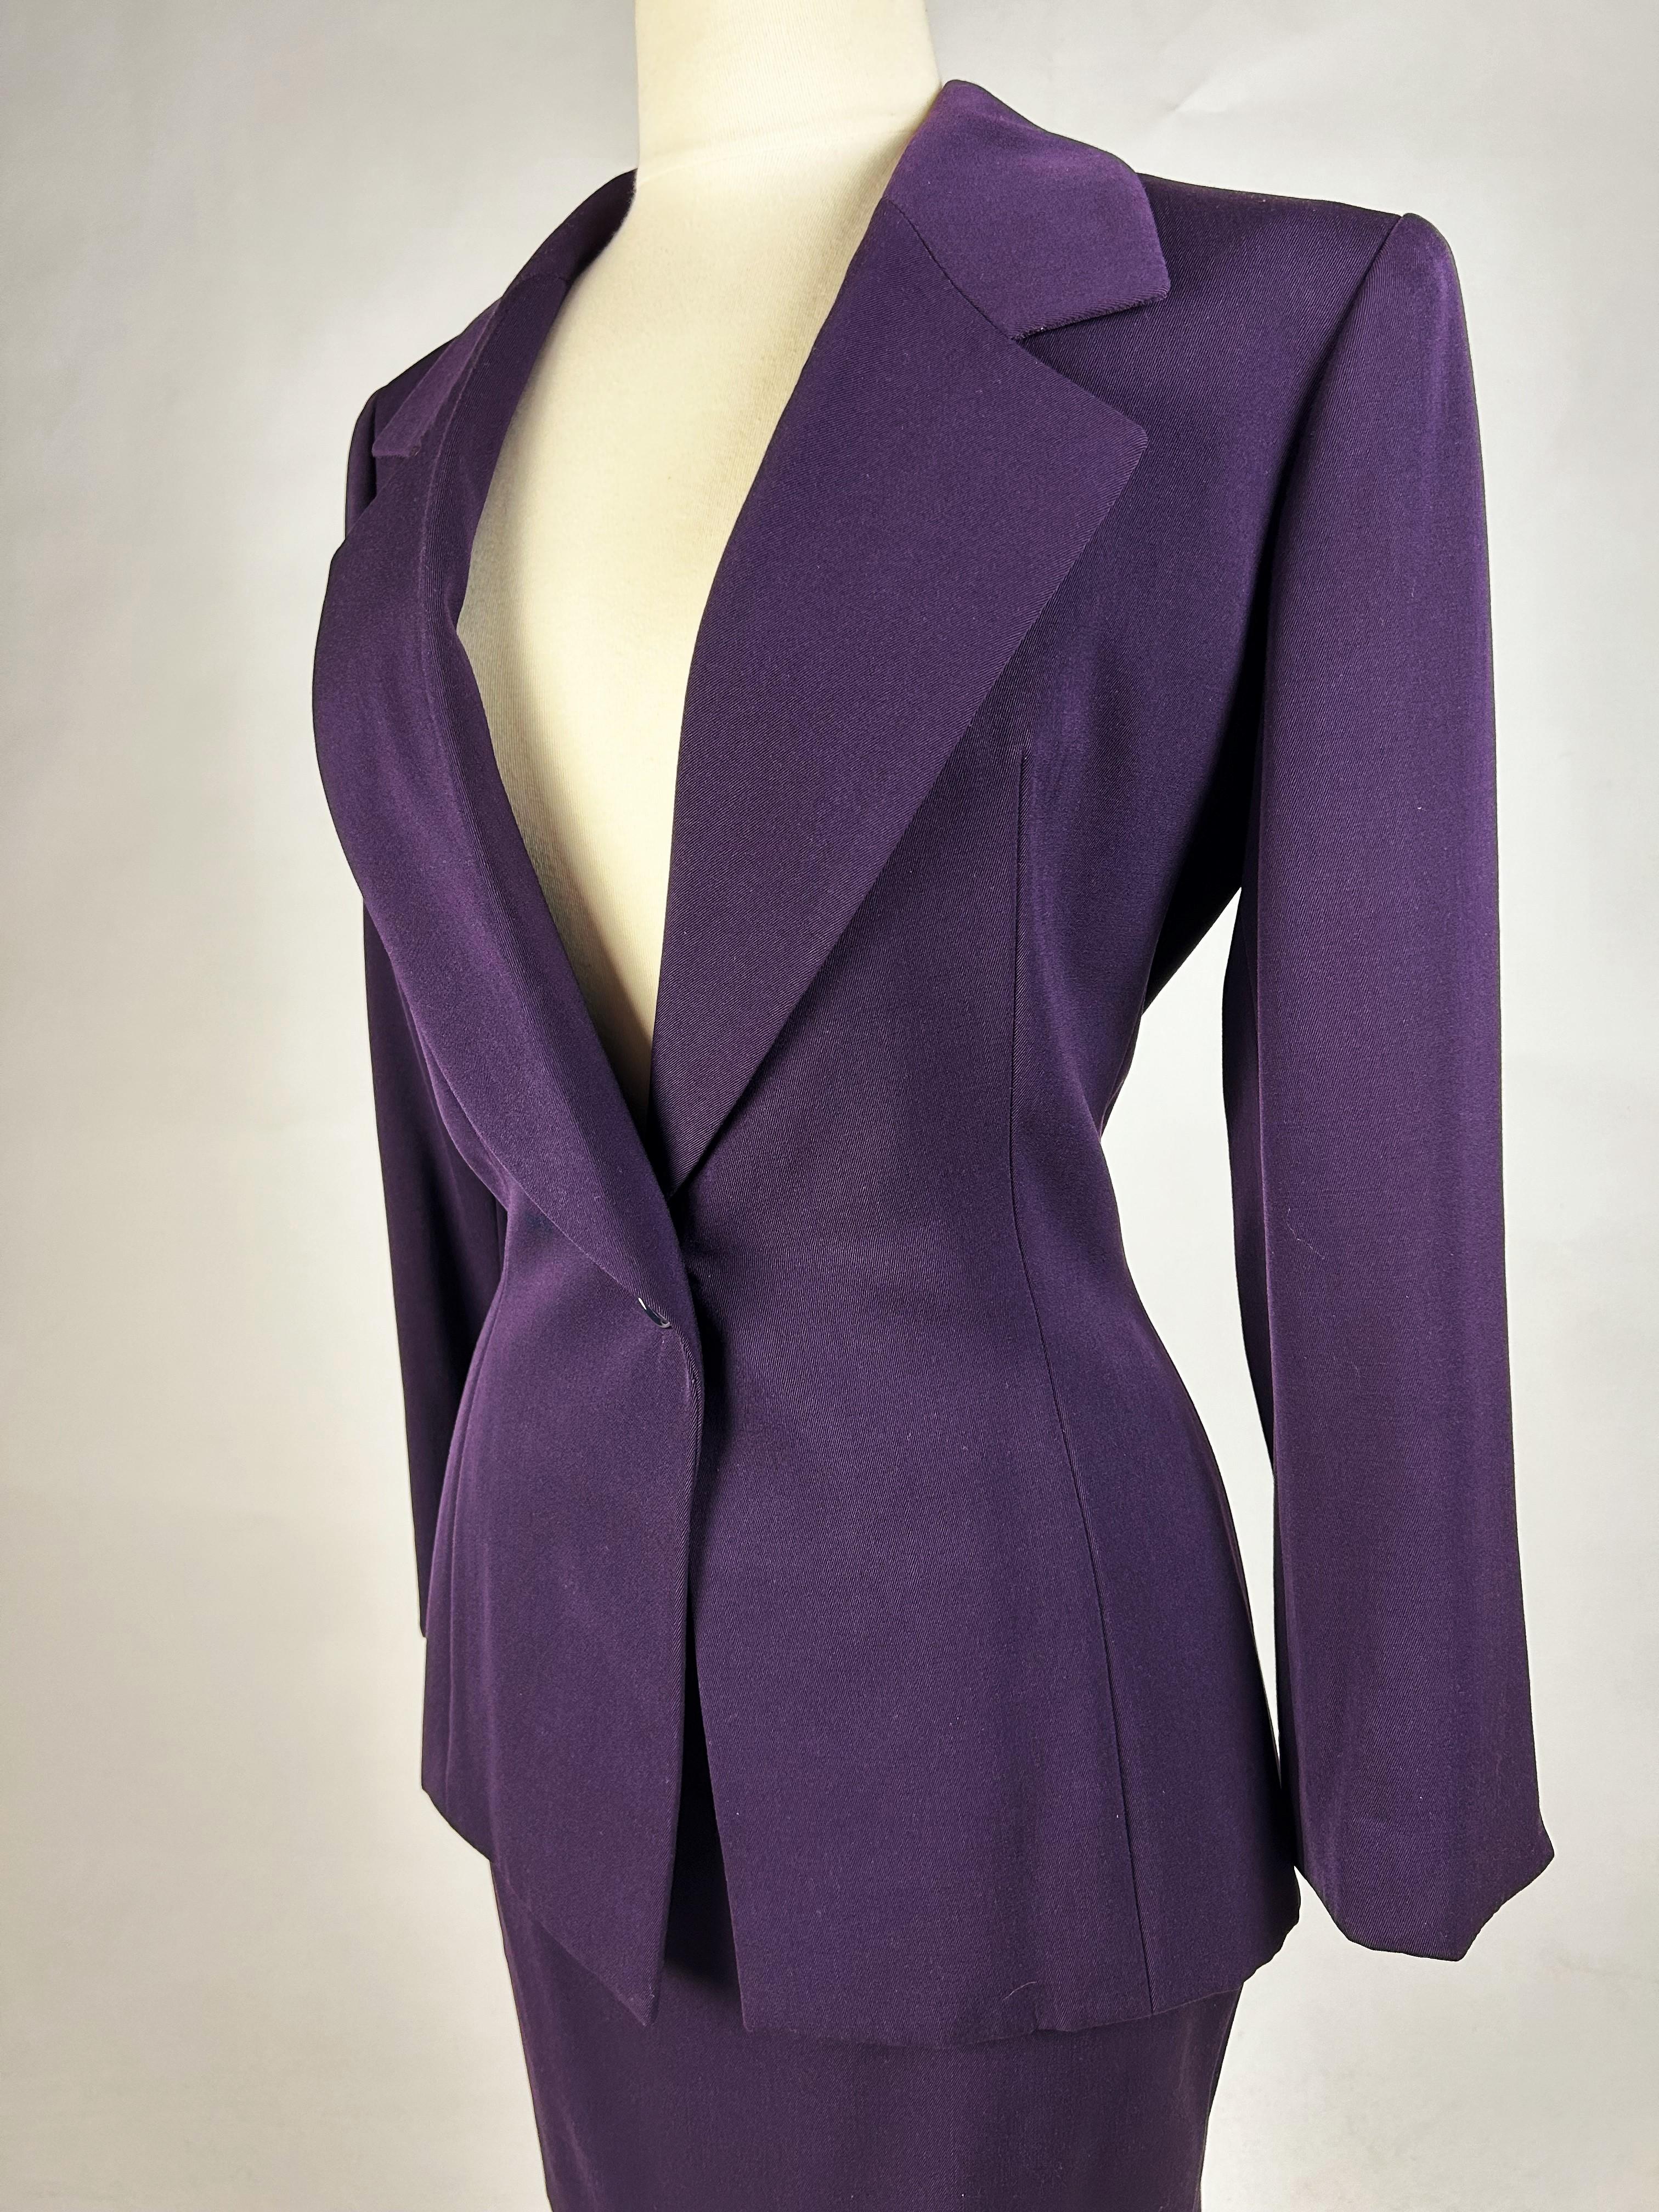 Skirt suit by Gianfranco Ferré for Christian Dior Haute Couture Circa 1995 For Sale 3